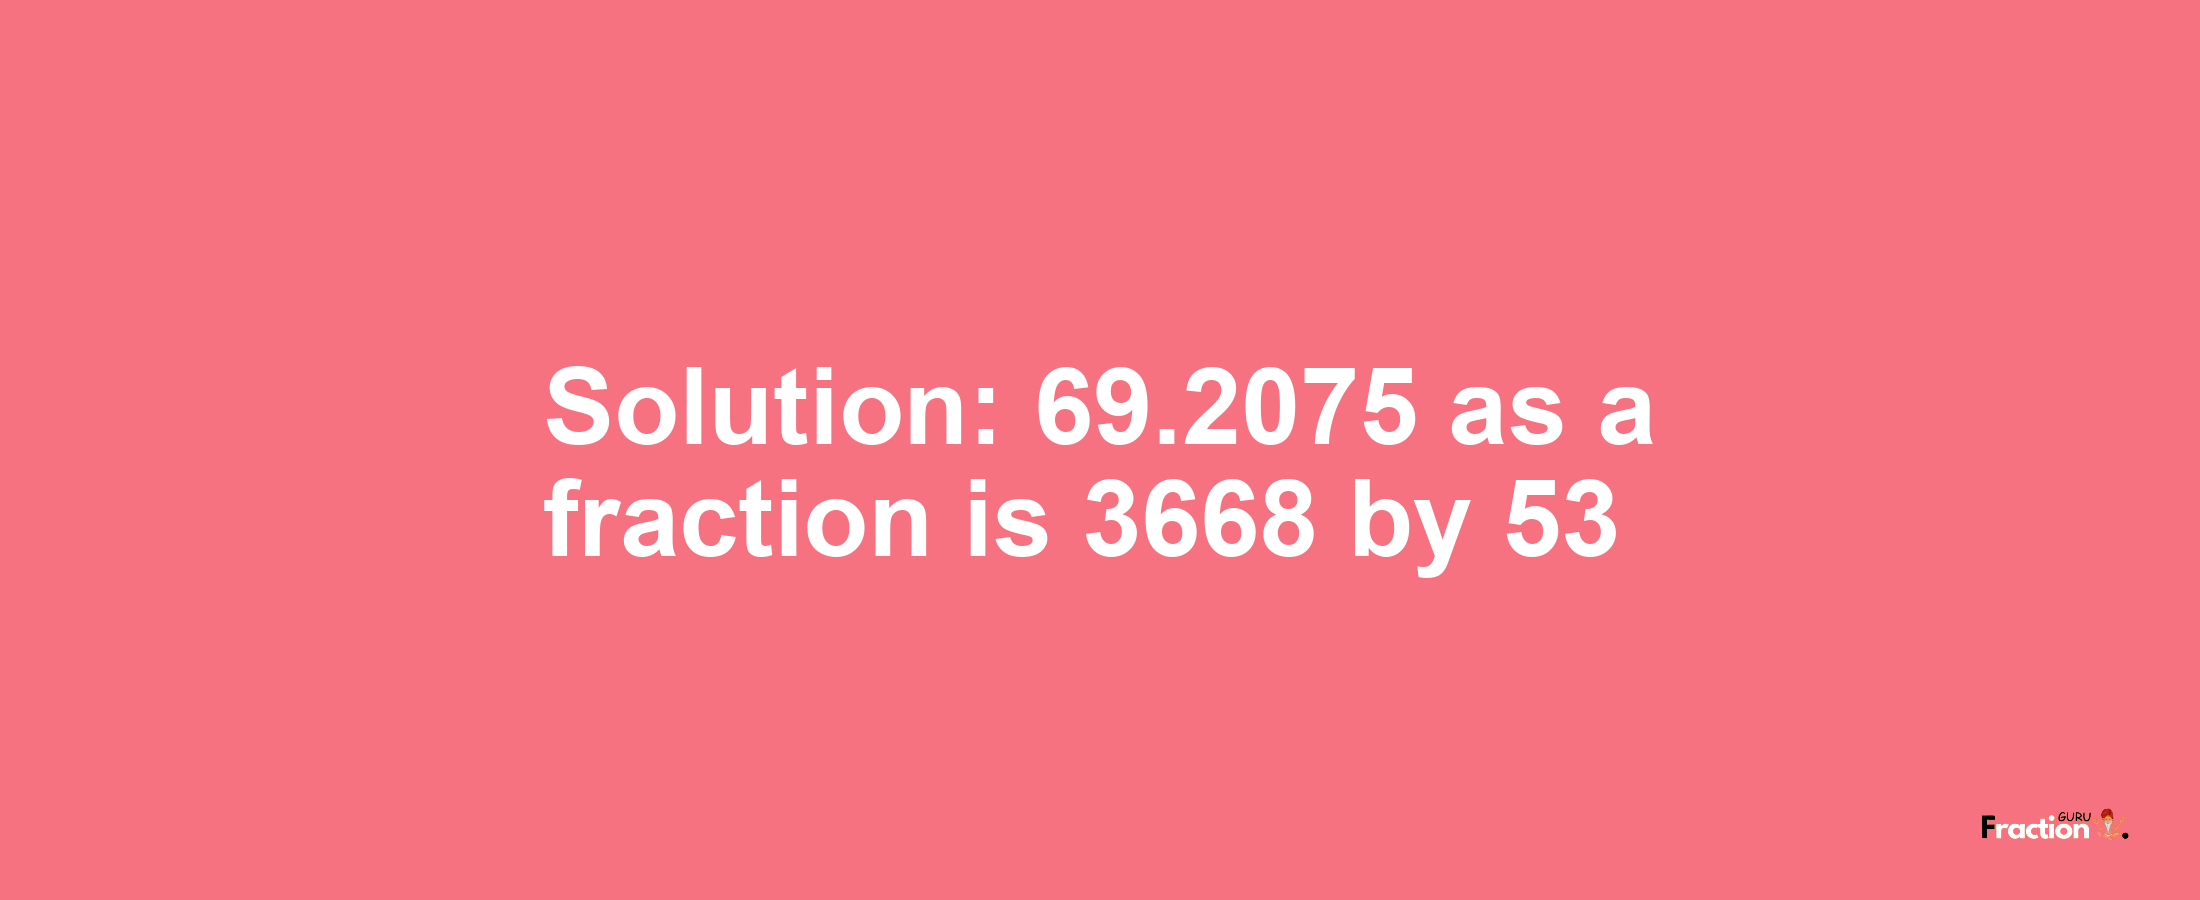 Solution:69.2075 as a fraction is 3668/53